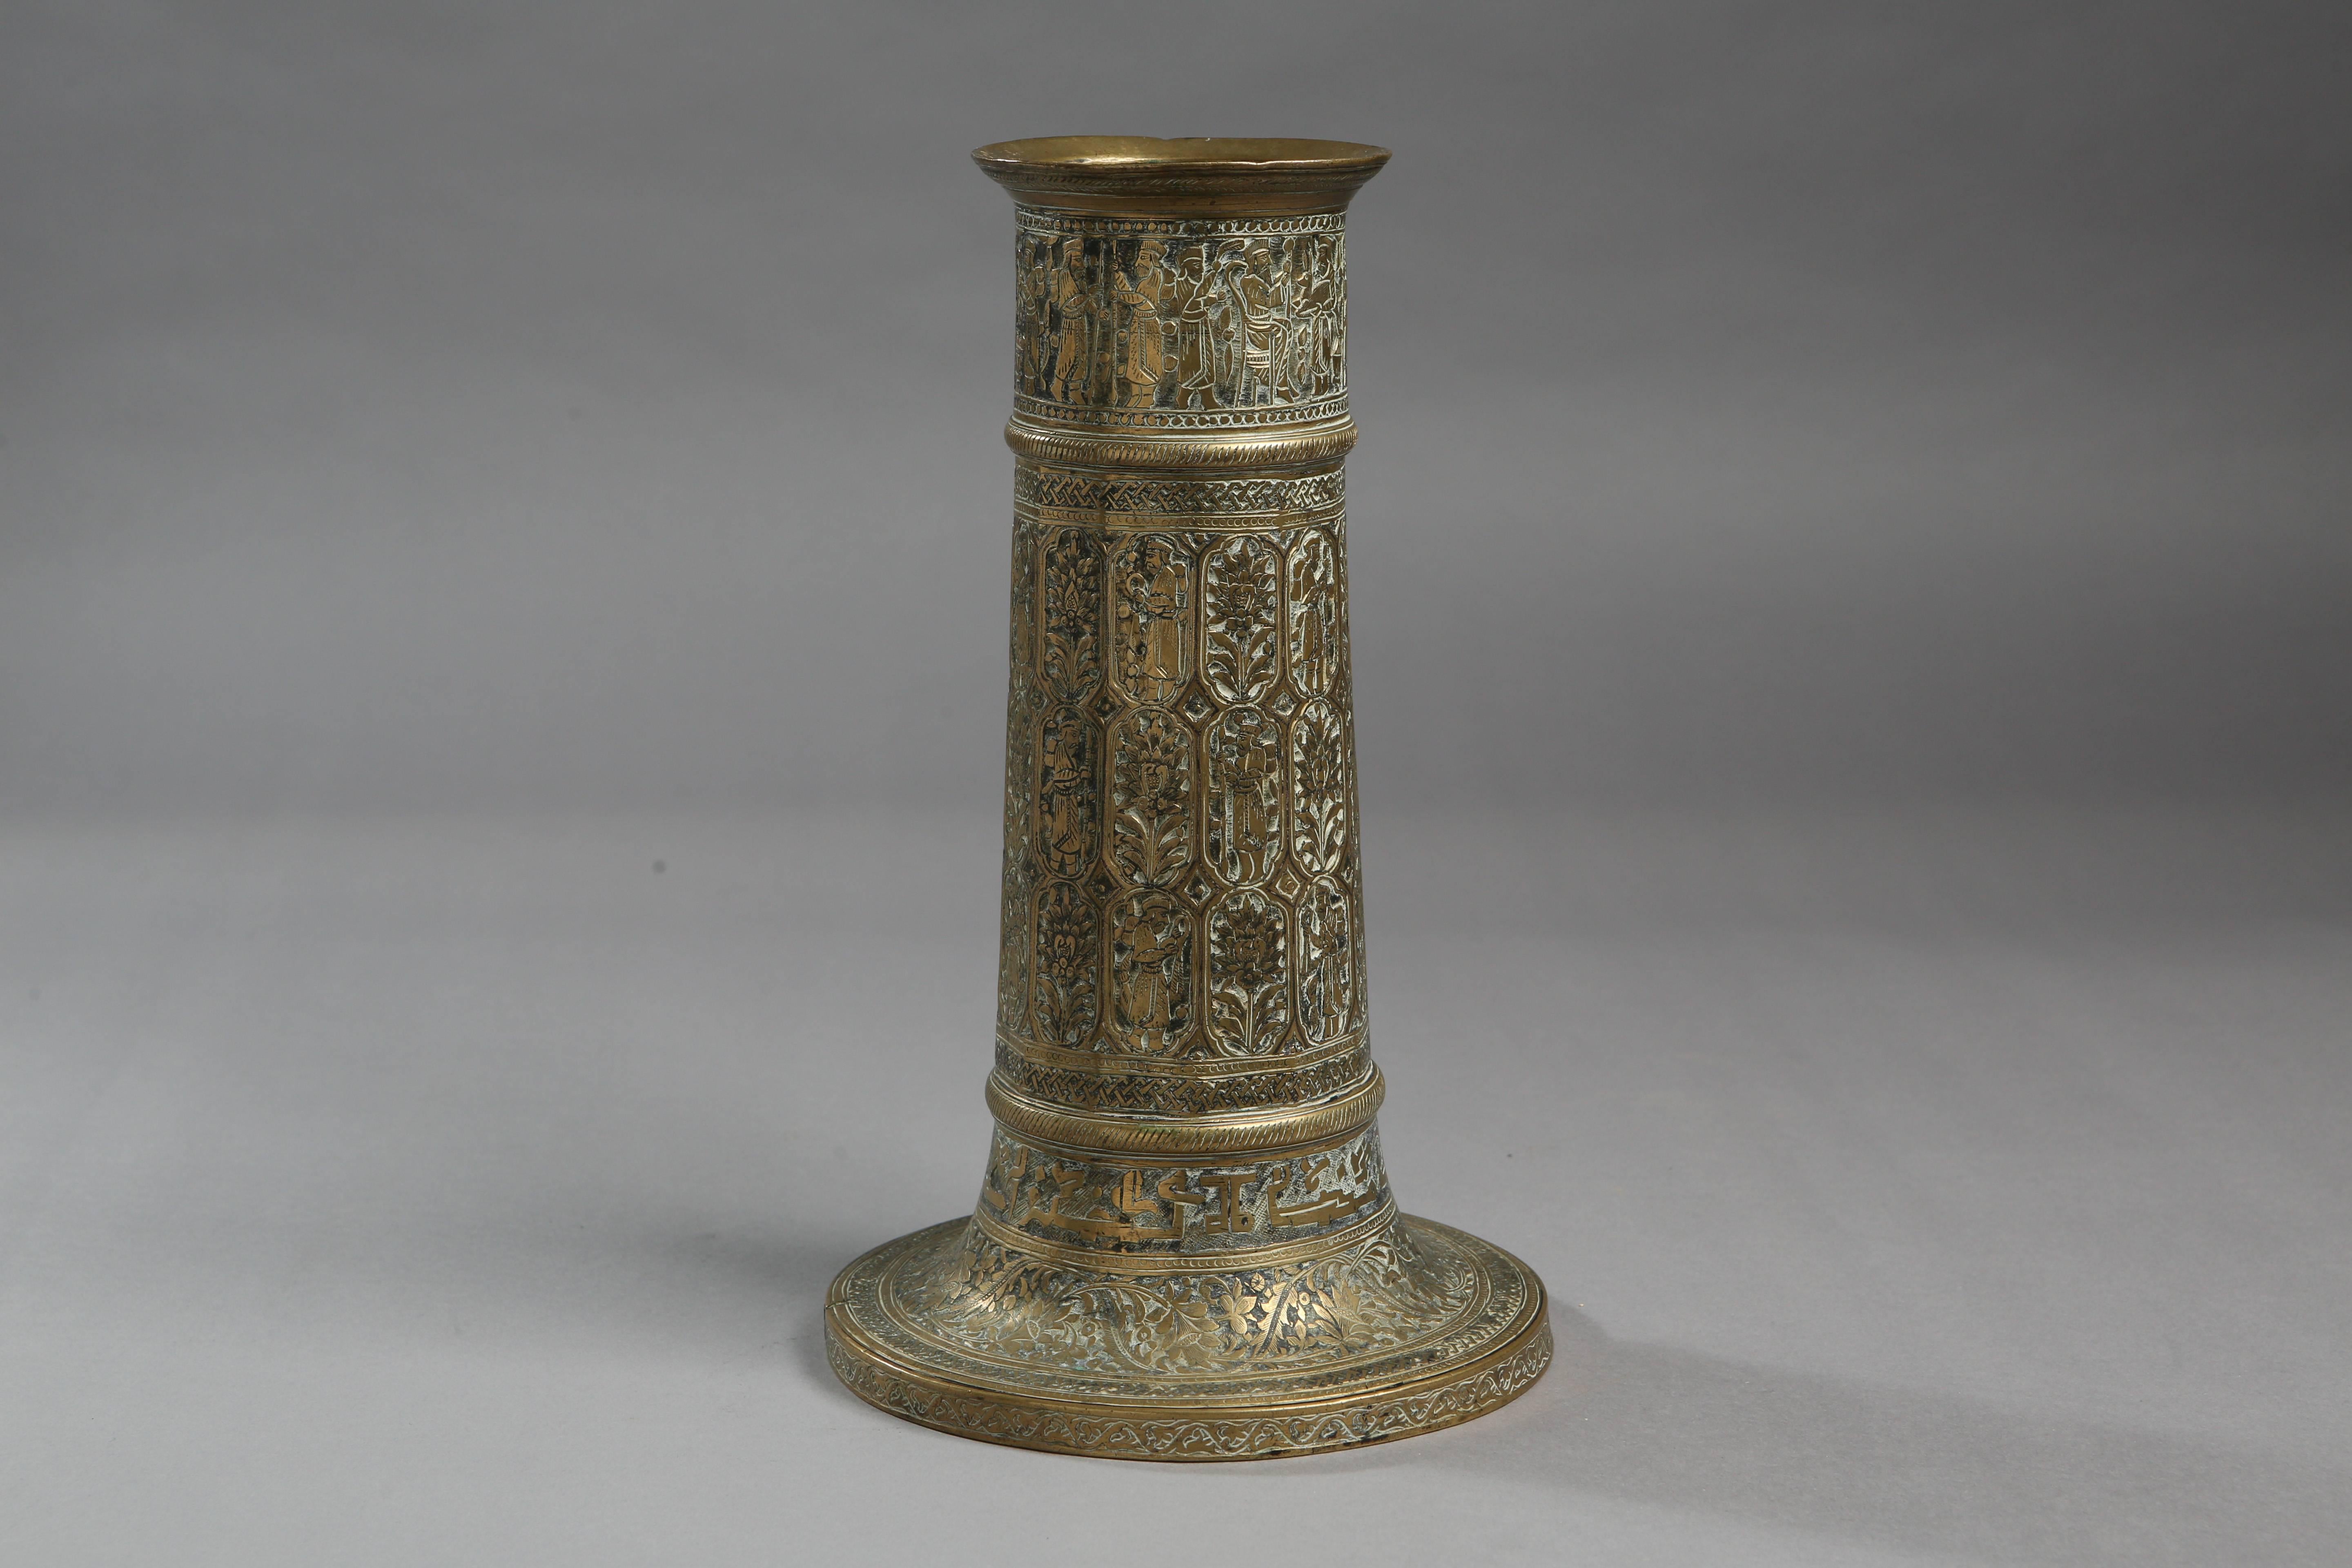 This 19th century brass Qajar candlestick features figural and vegetative imagery along with floral and leaf motifs and an inscription round the bottom.

Measurements: 29cm tall x 15.5 cm base diameter.